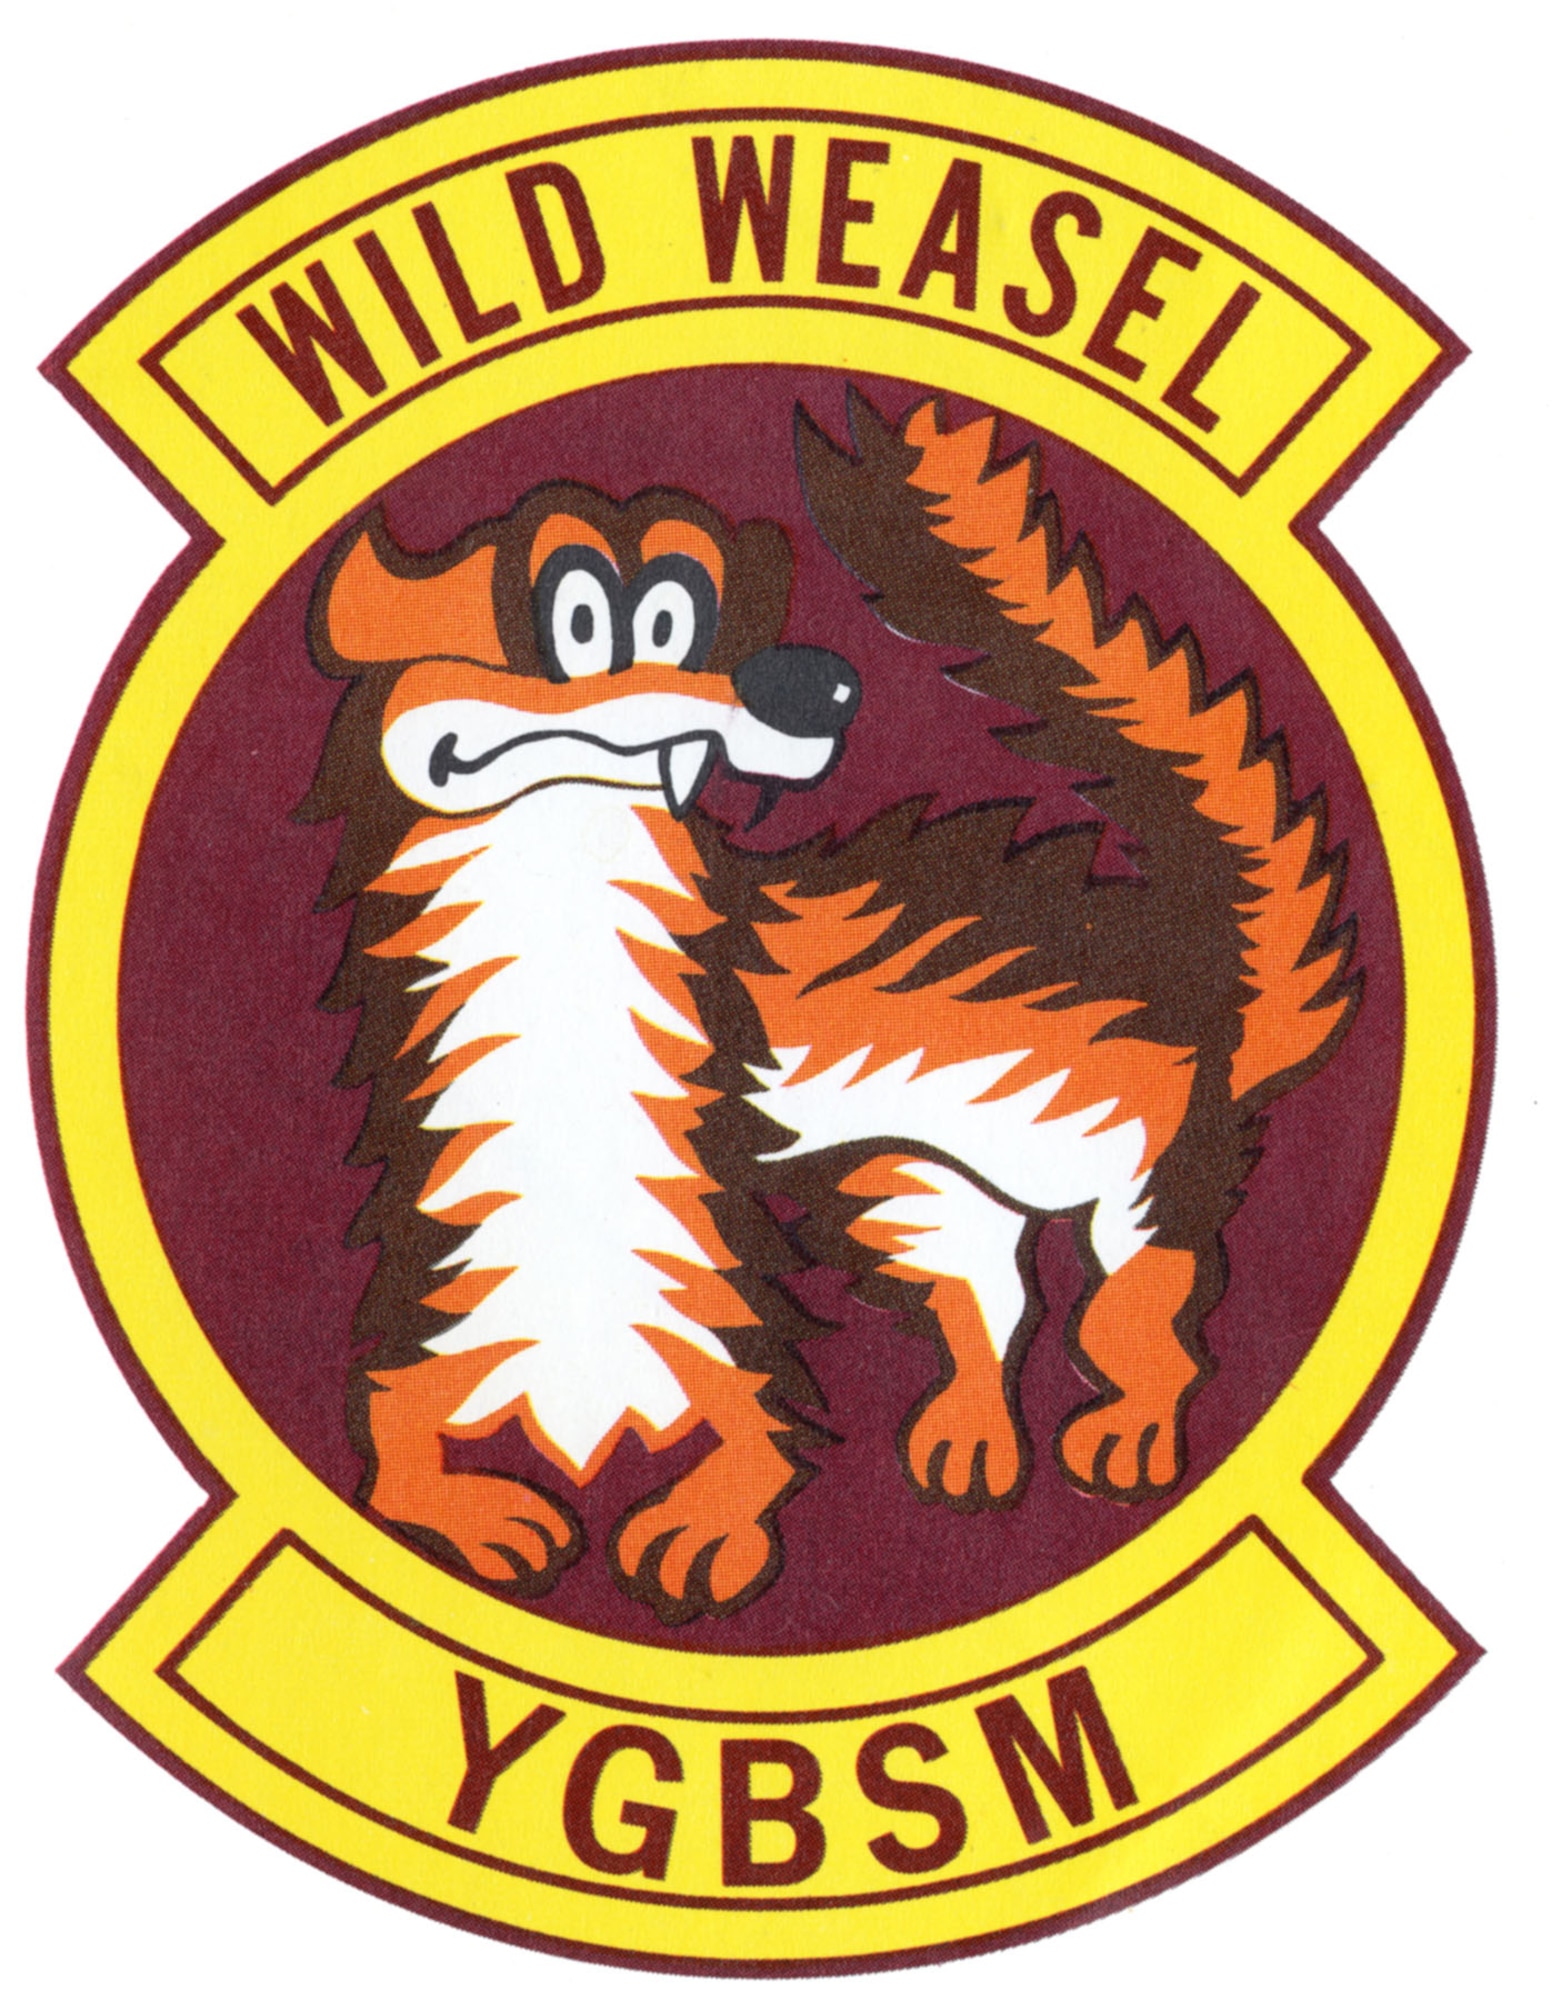 A weasel, nicknames Willie, figured prominently in many official and unofficial Wild Weasel patches and logos. (U.S. Air Force photo)